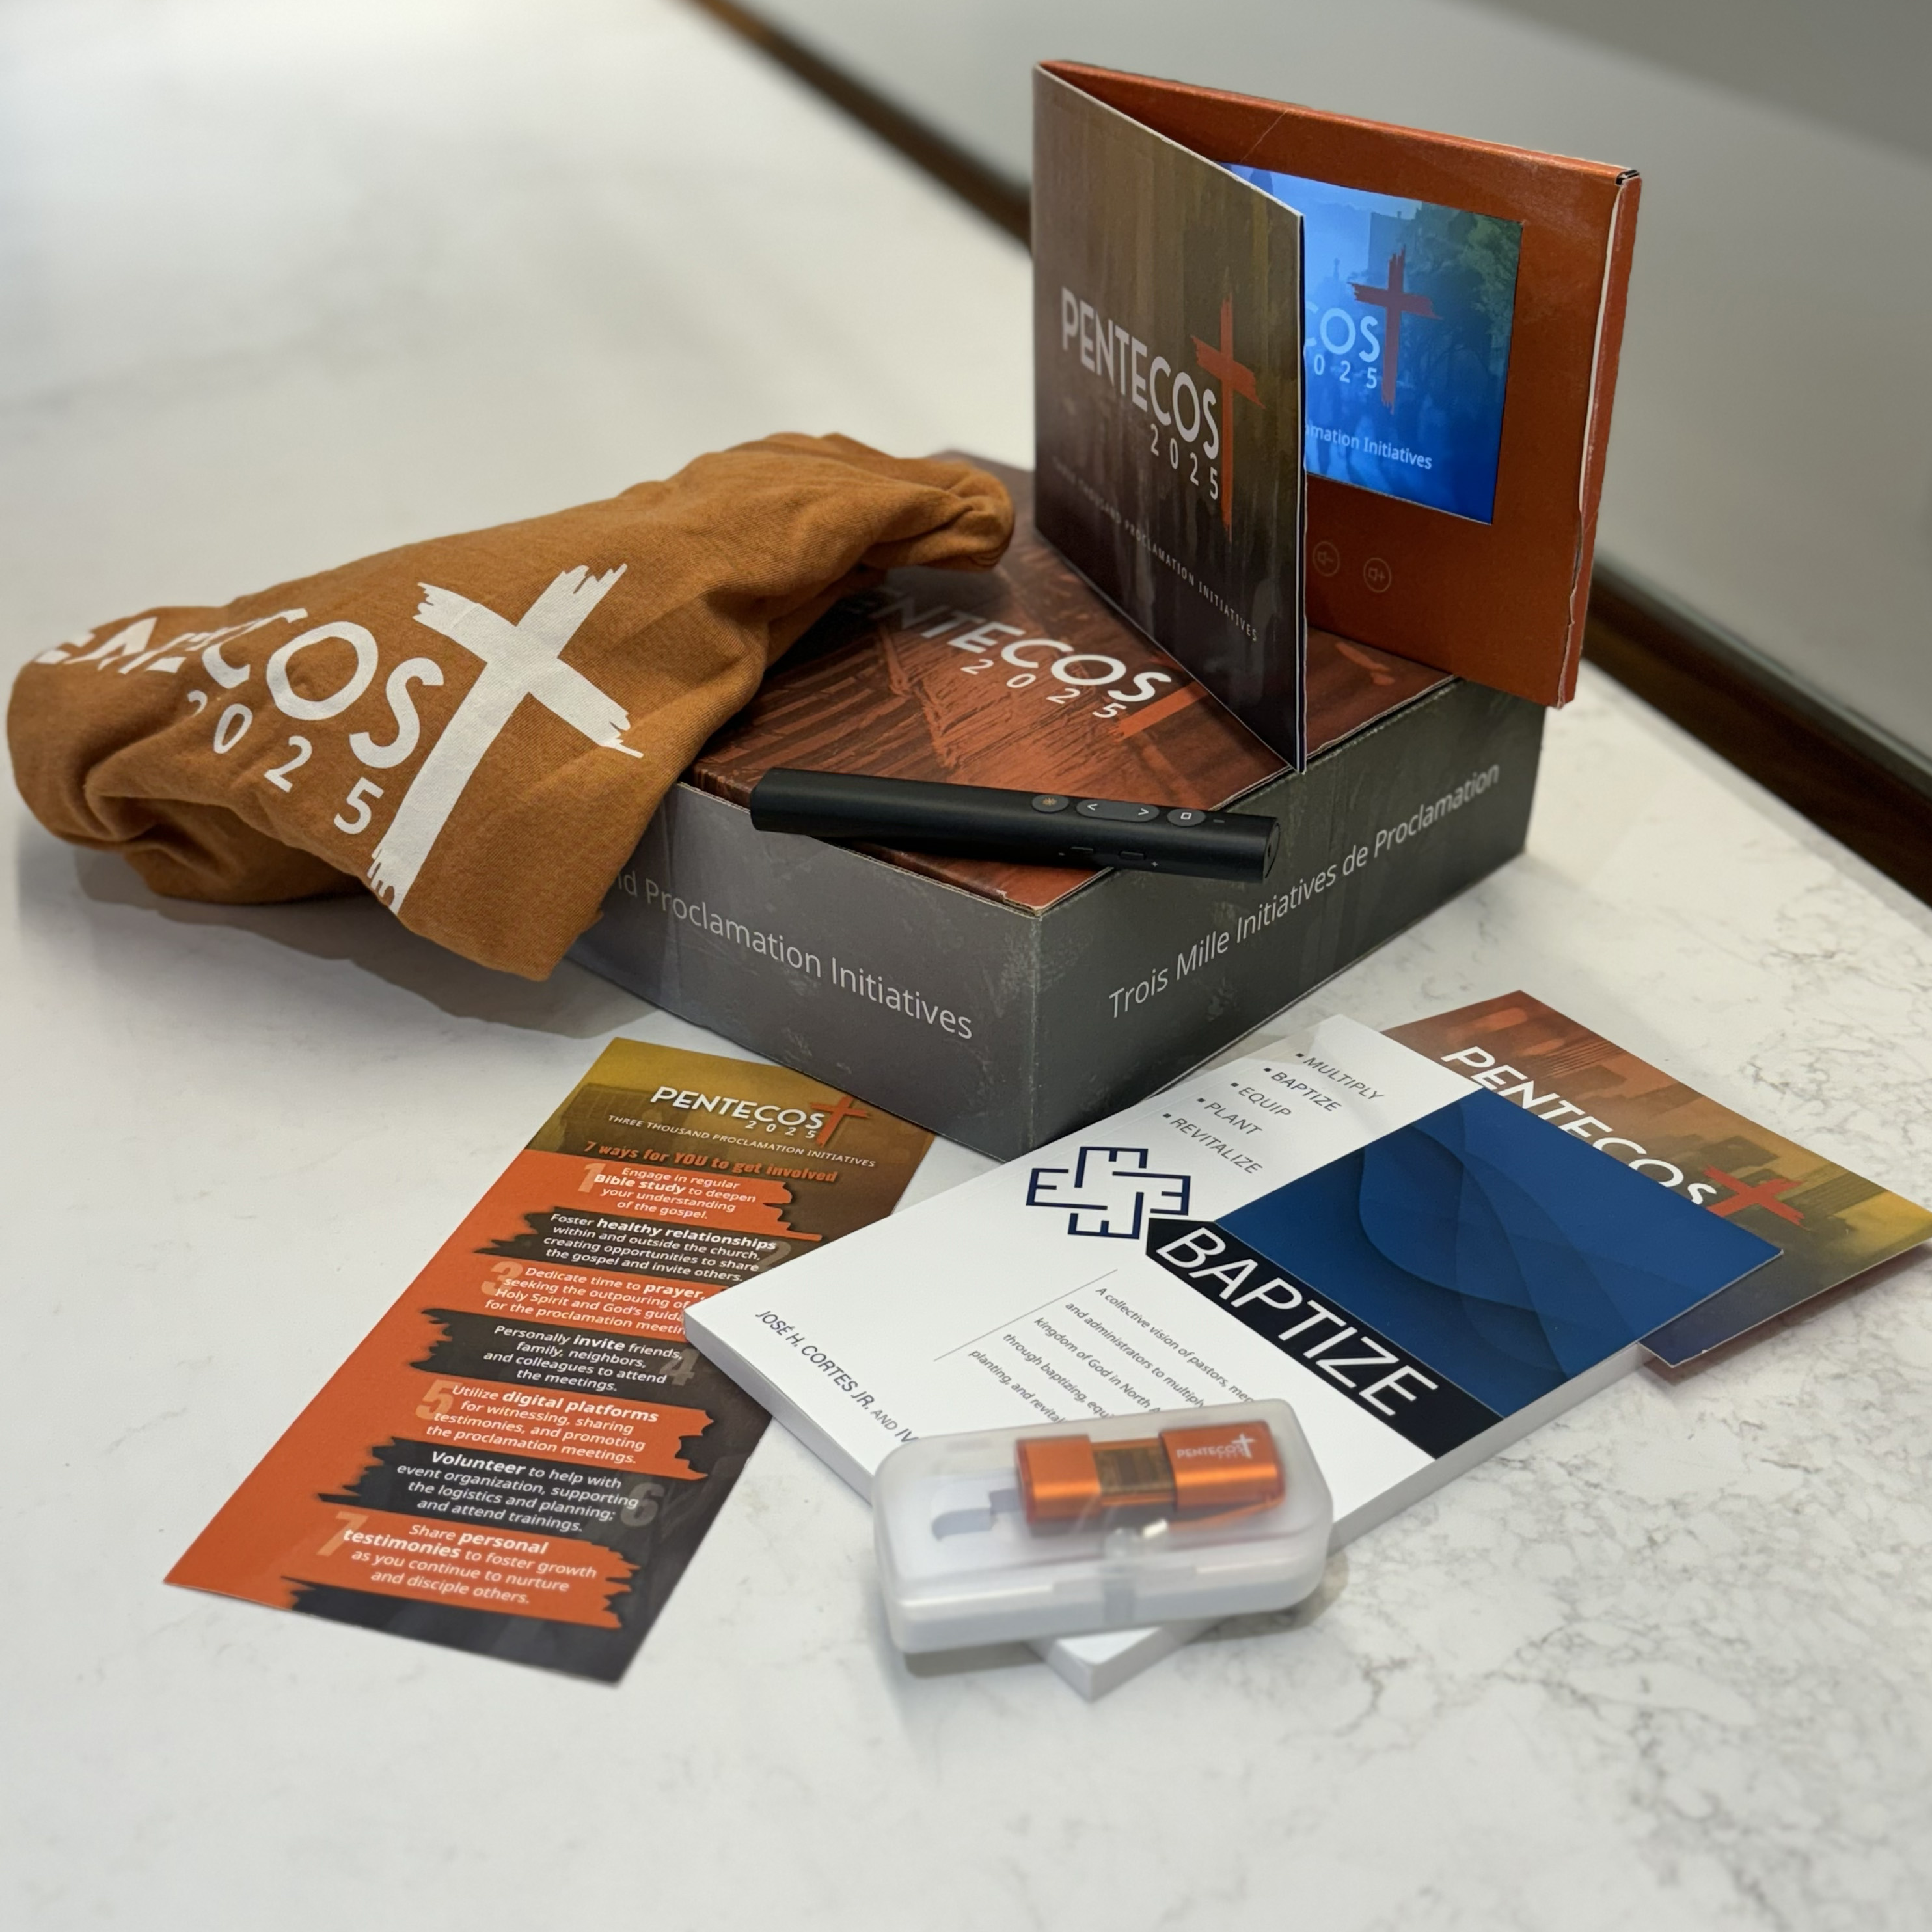 Pentecost 2025 welcome kit with video message player, T-shirt, etc.